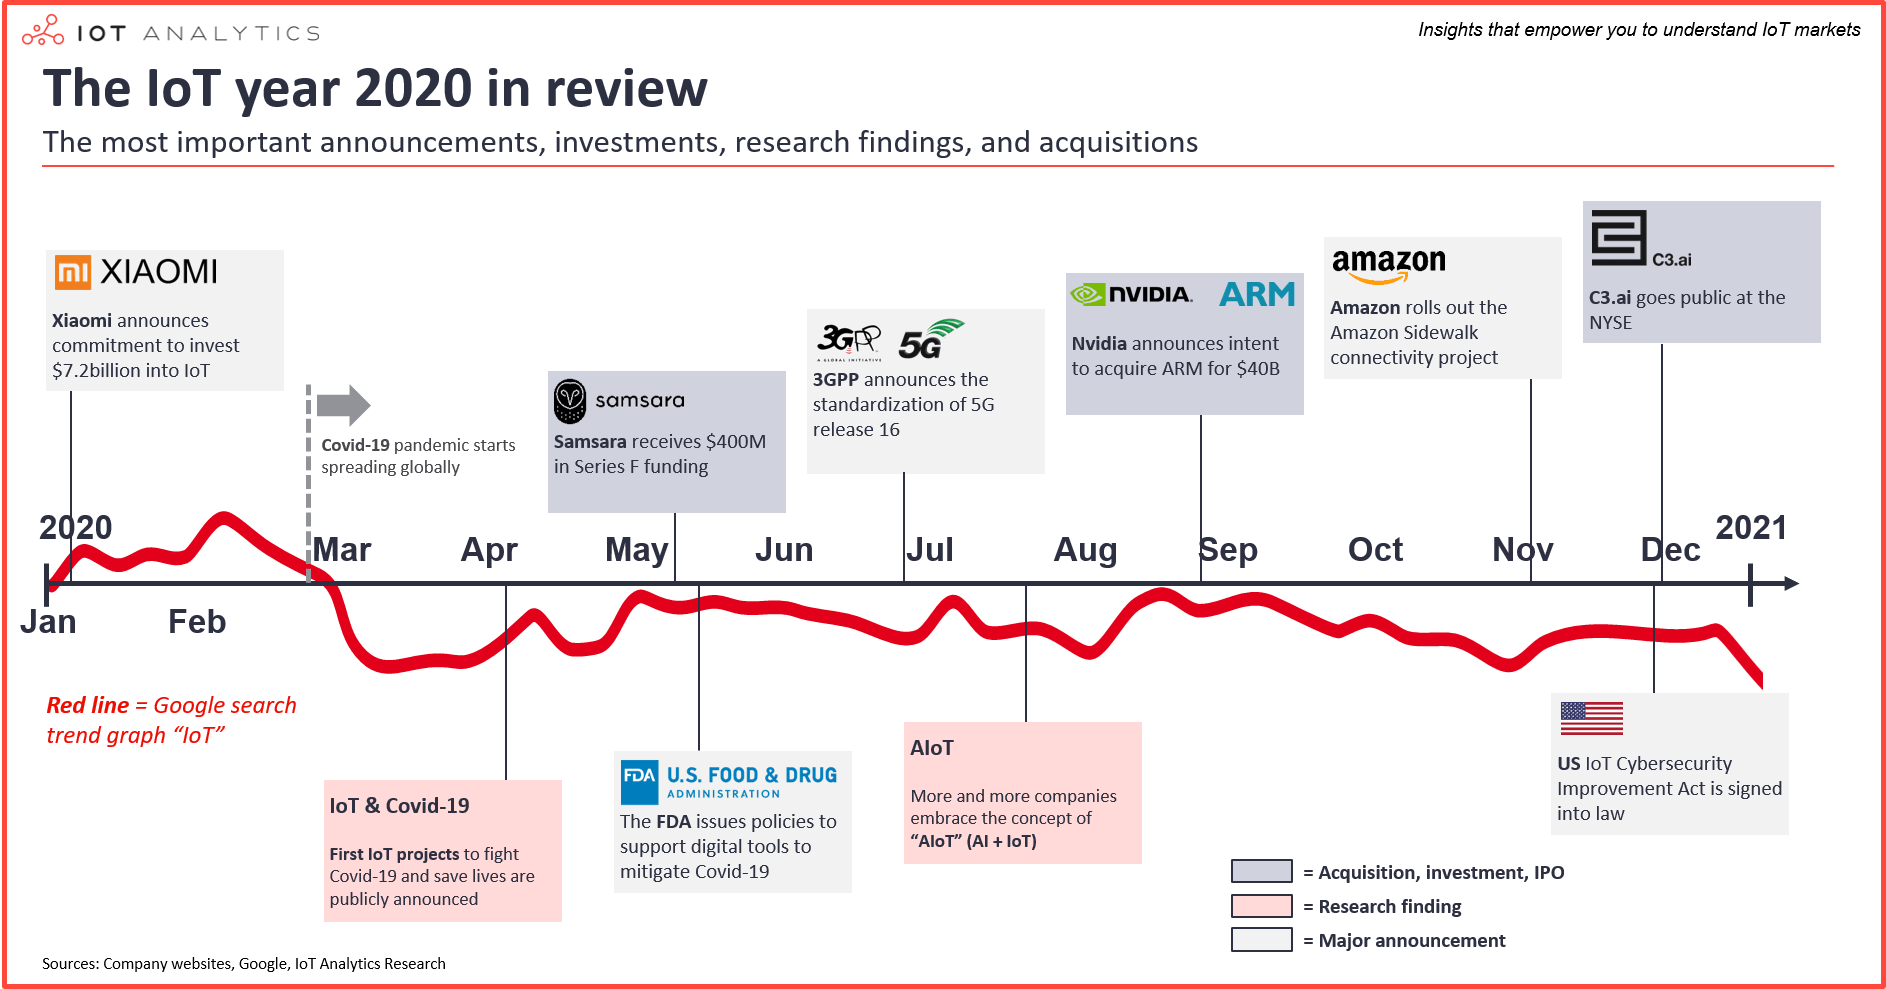 IoT 2020 in review overview image